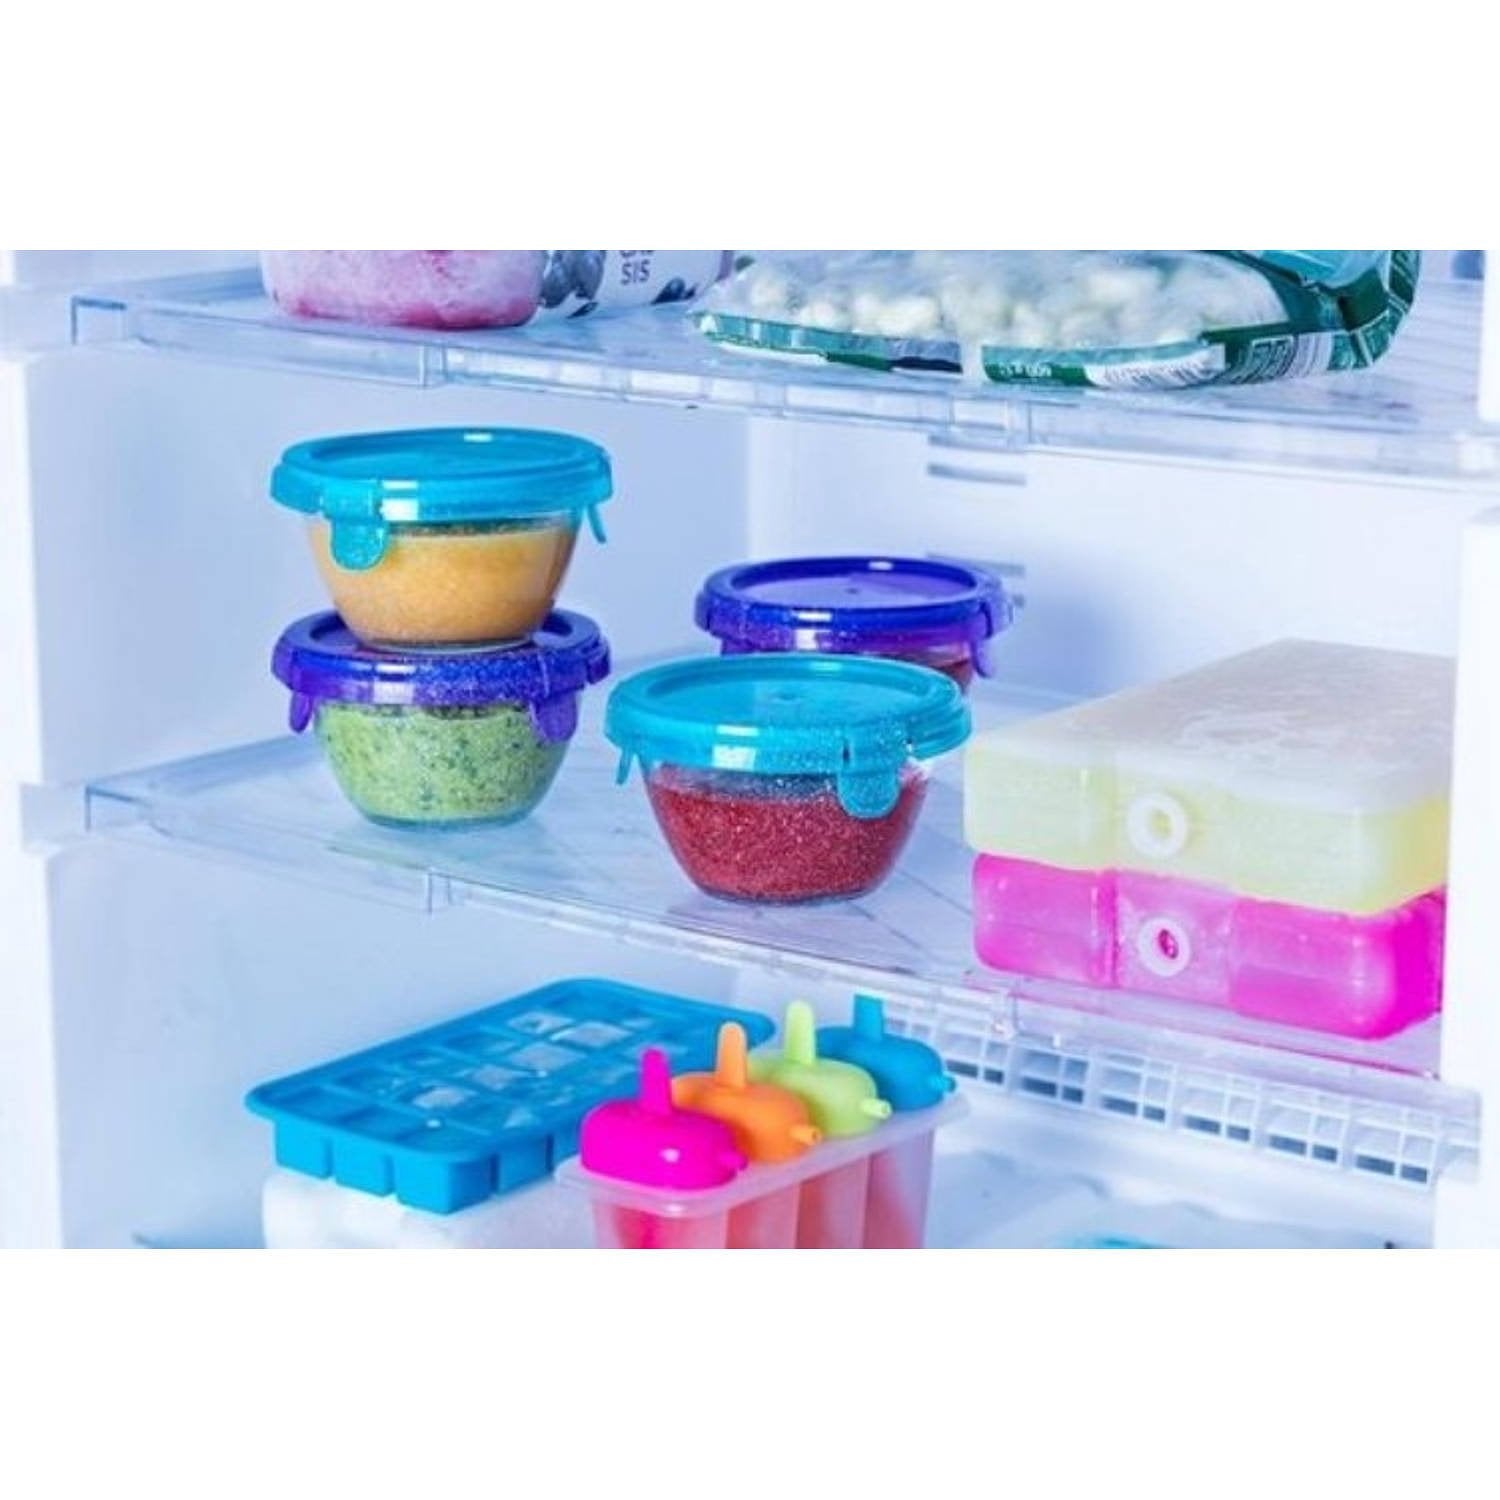 Pyrex My First Pyrex Food Container Round 200 ml Set of 10 Pieces